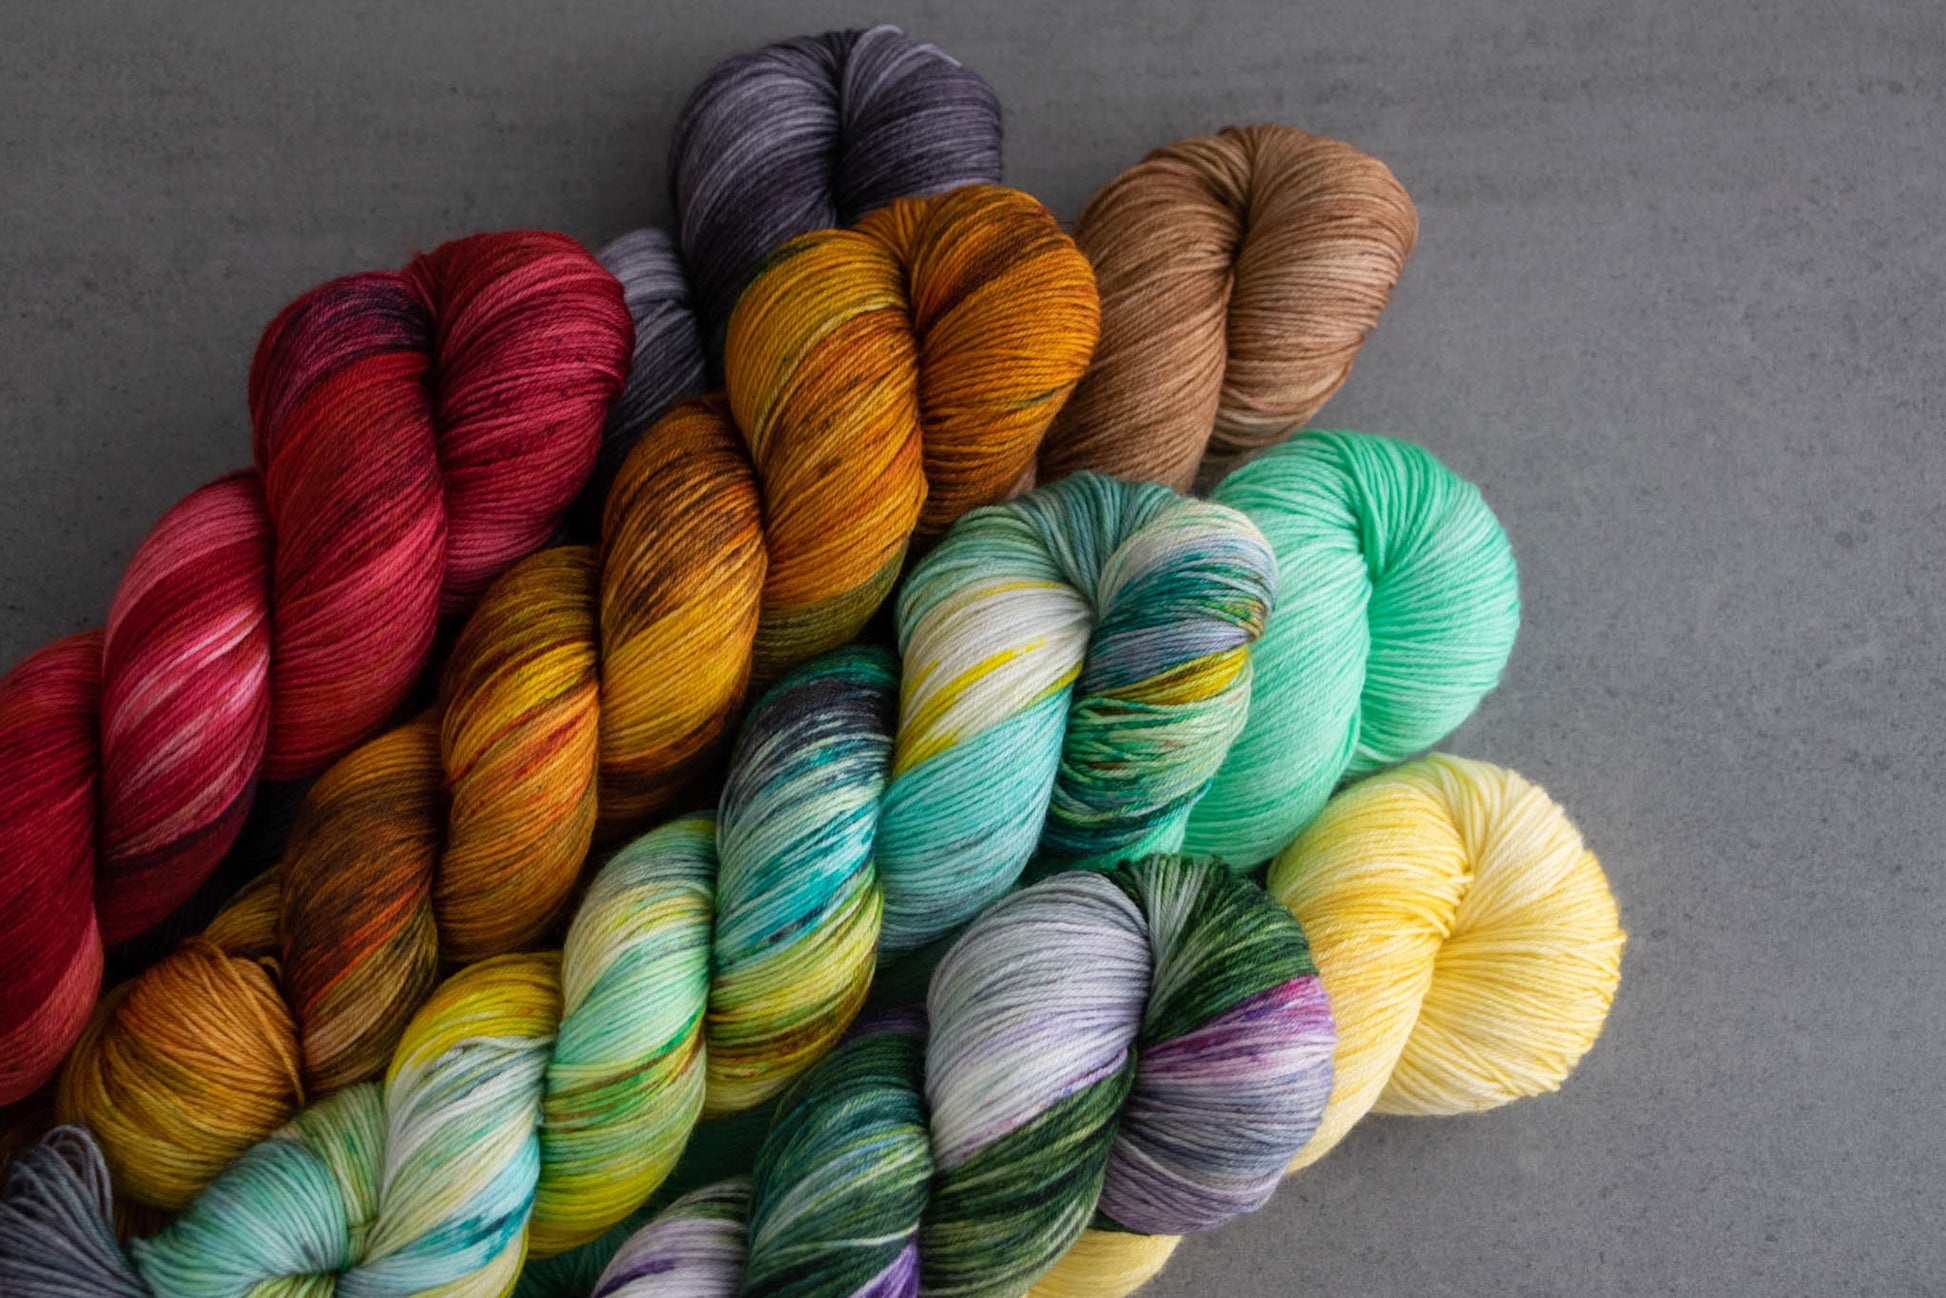 All eight skeins in the collection including red, brown, teal, yellow, purple, aqua, orange, and gray stacked on top of each other.